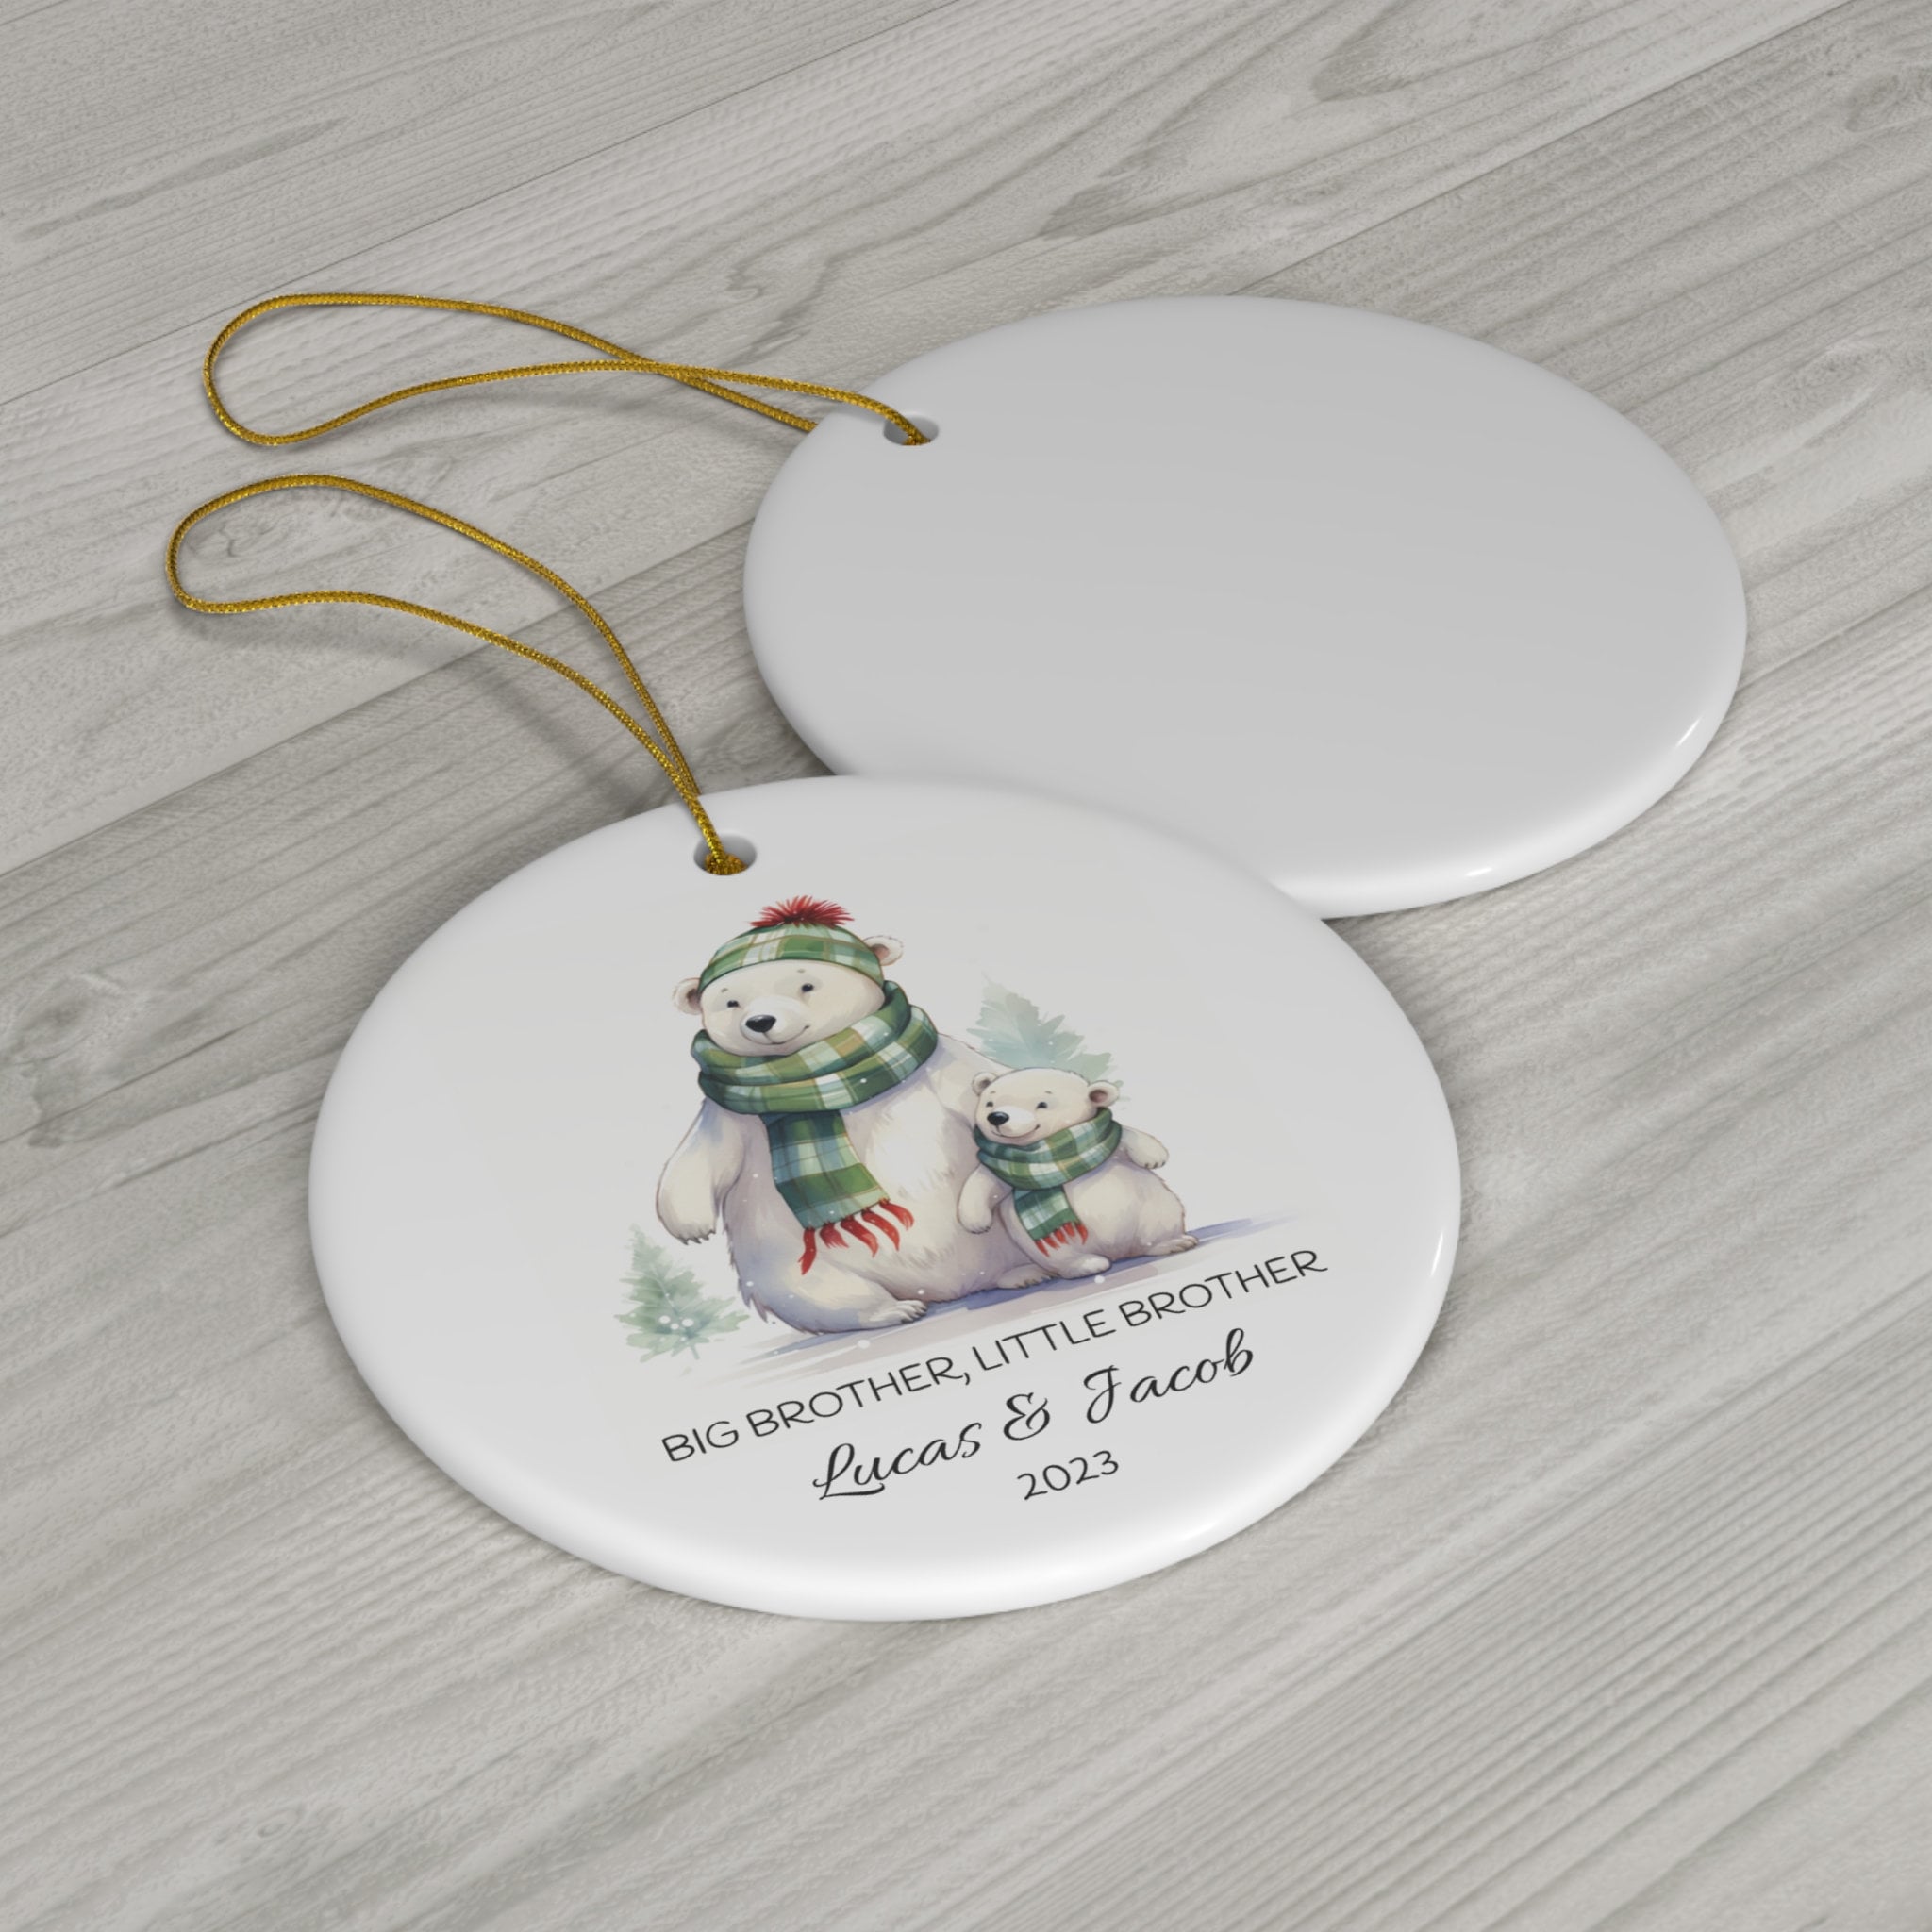 Personalized Big Brother Little Brother Polar Bear Ornament